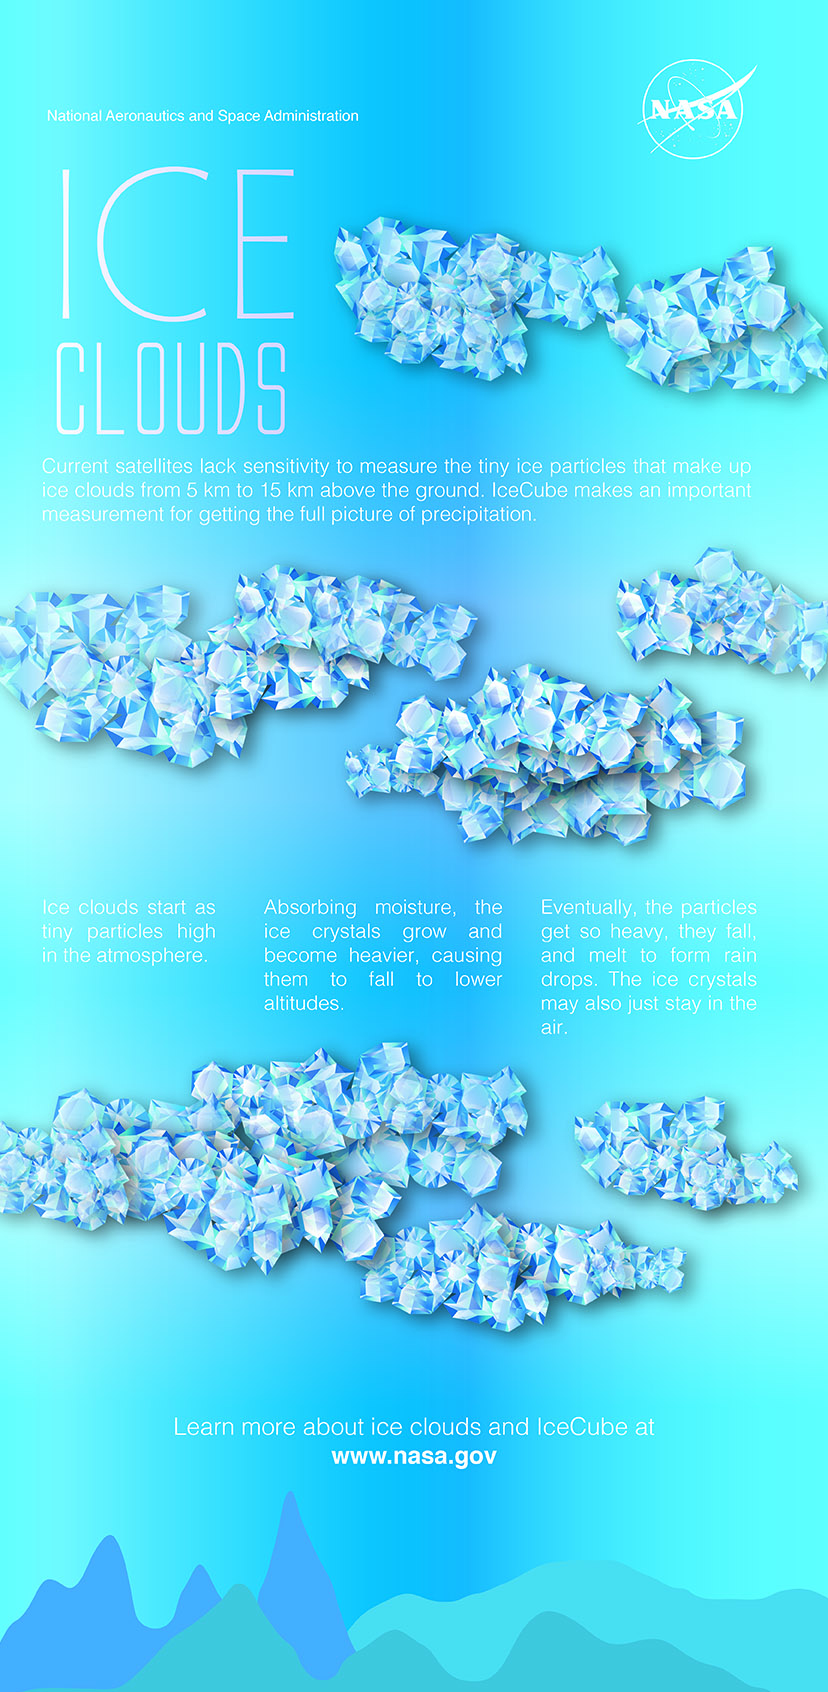 Infographic about ice clouds. It says: Current satellites lack sensitivity to measure the tiny ice particles that make up ice clouds from 5 km to 15 km above the ground. IceCube makes an important measurement for getting the full picture of precipitation. Ice clouds start as tiny particles high in the atmosphere. Absorbing moisture, the ice crystals grow and become heavier, causing them to fall to lower altitudes. Eventually, the particles get so heavy, they fall, and melt to form rain drops. The ice crystals may also just stay in the air.